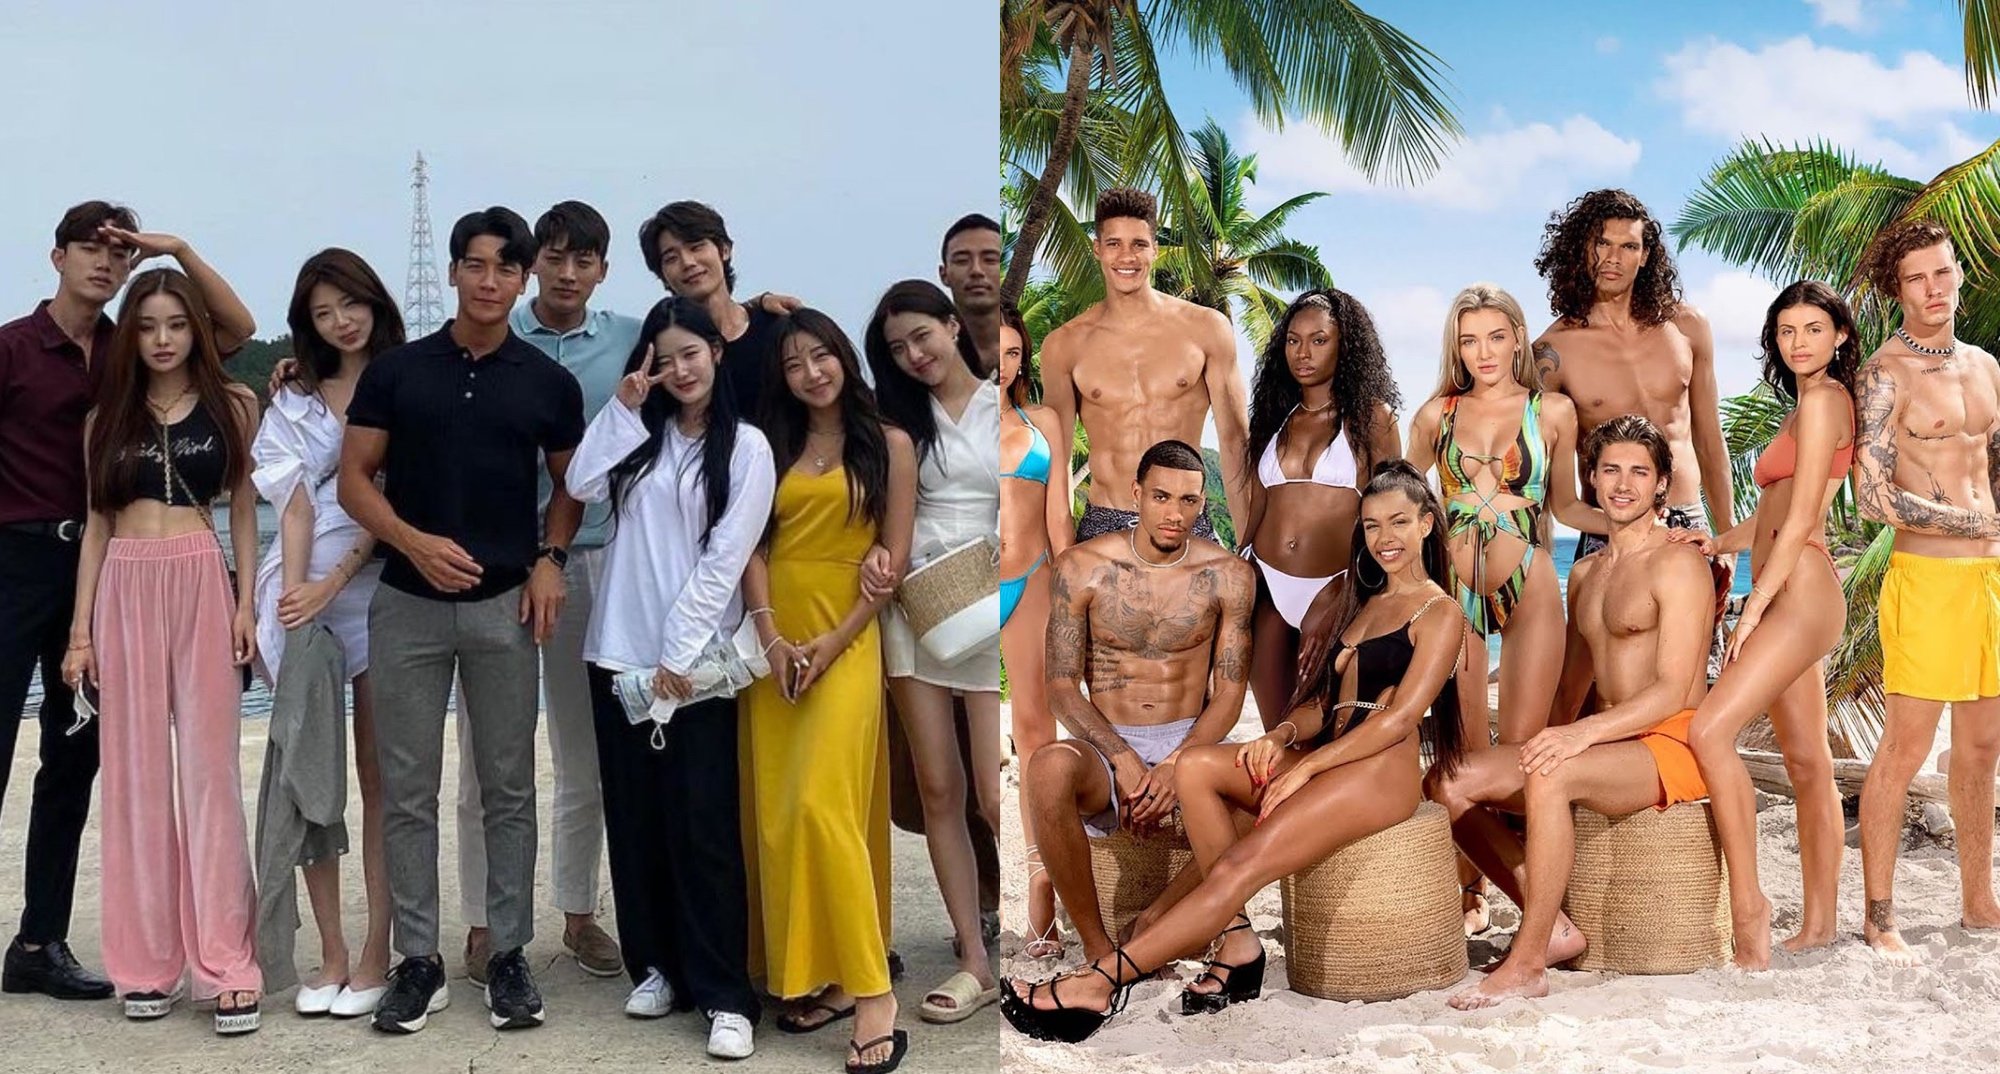 How Old Are The Cast Of Too Hot To Handle On Netflix?